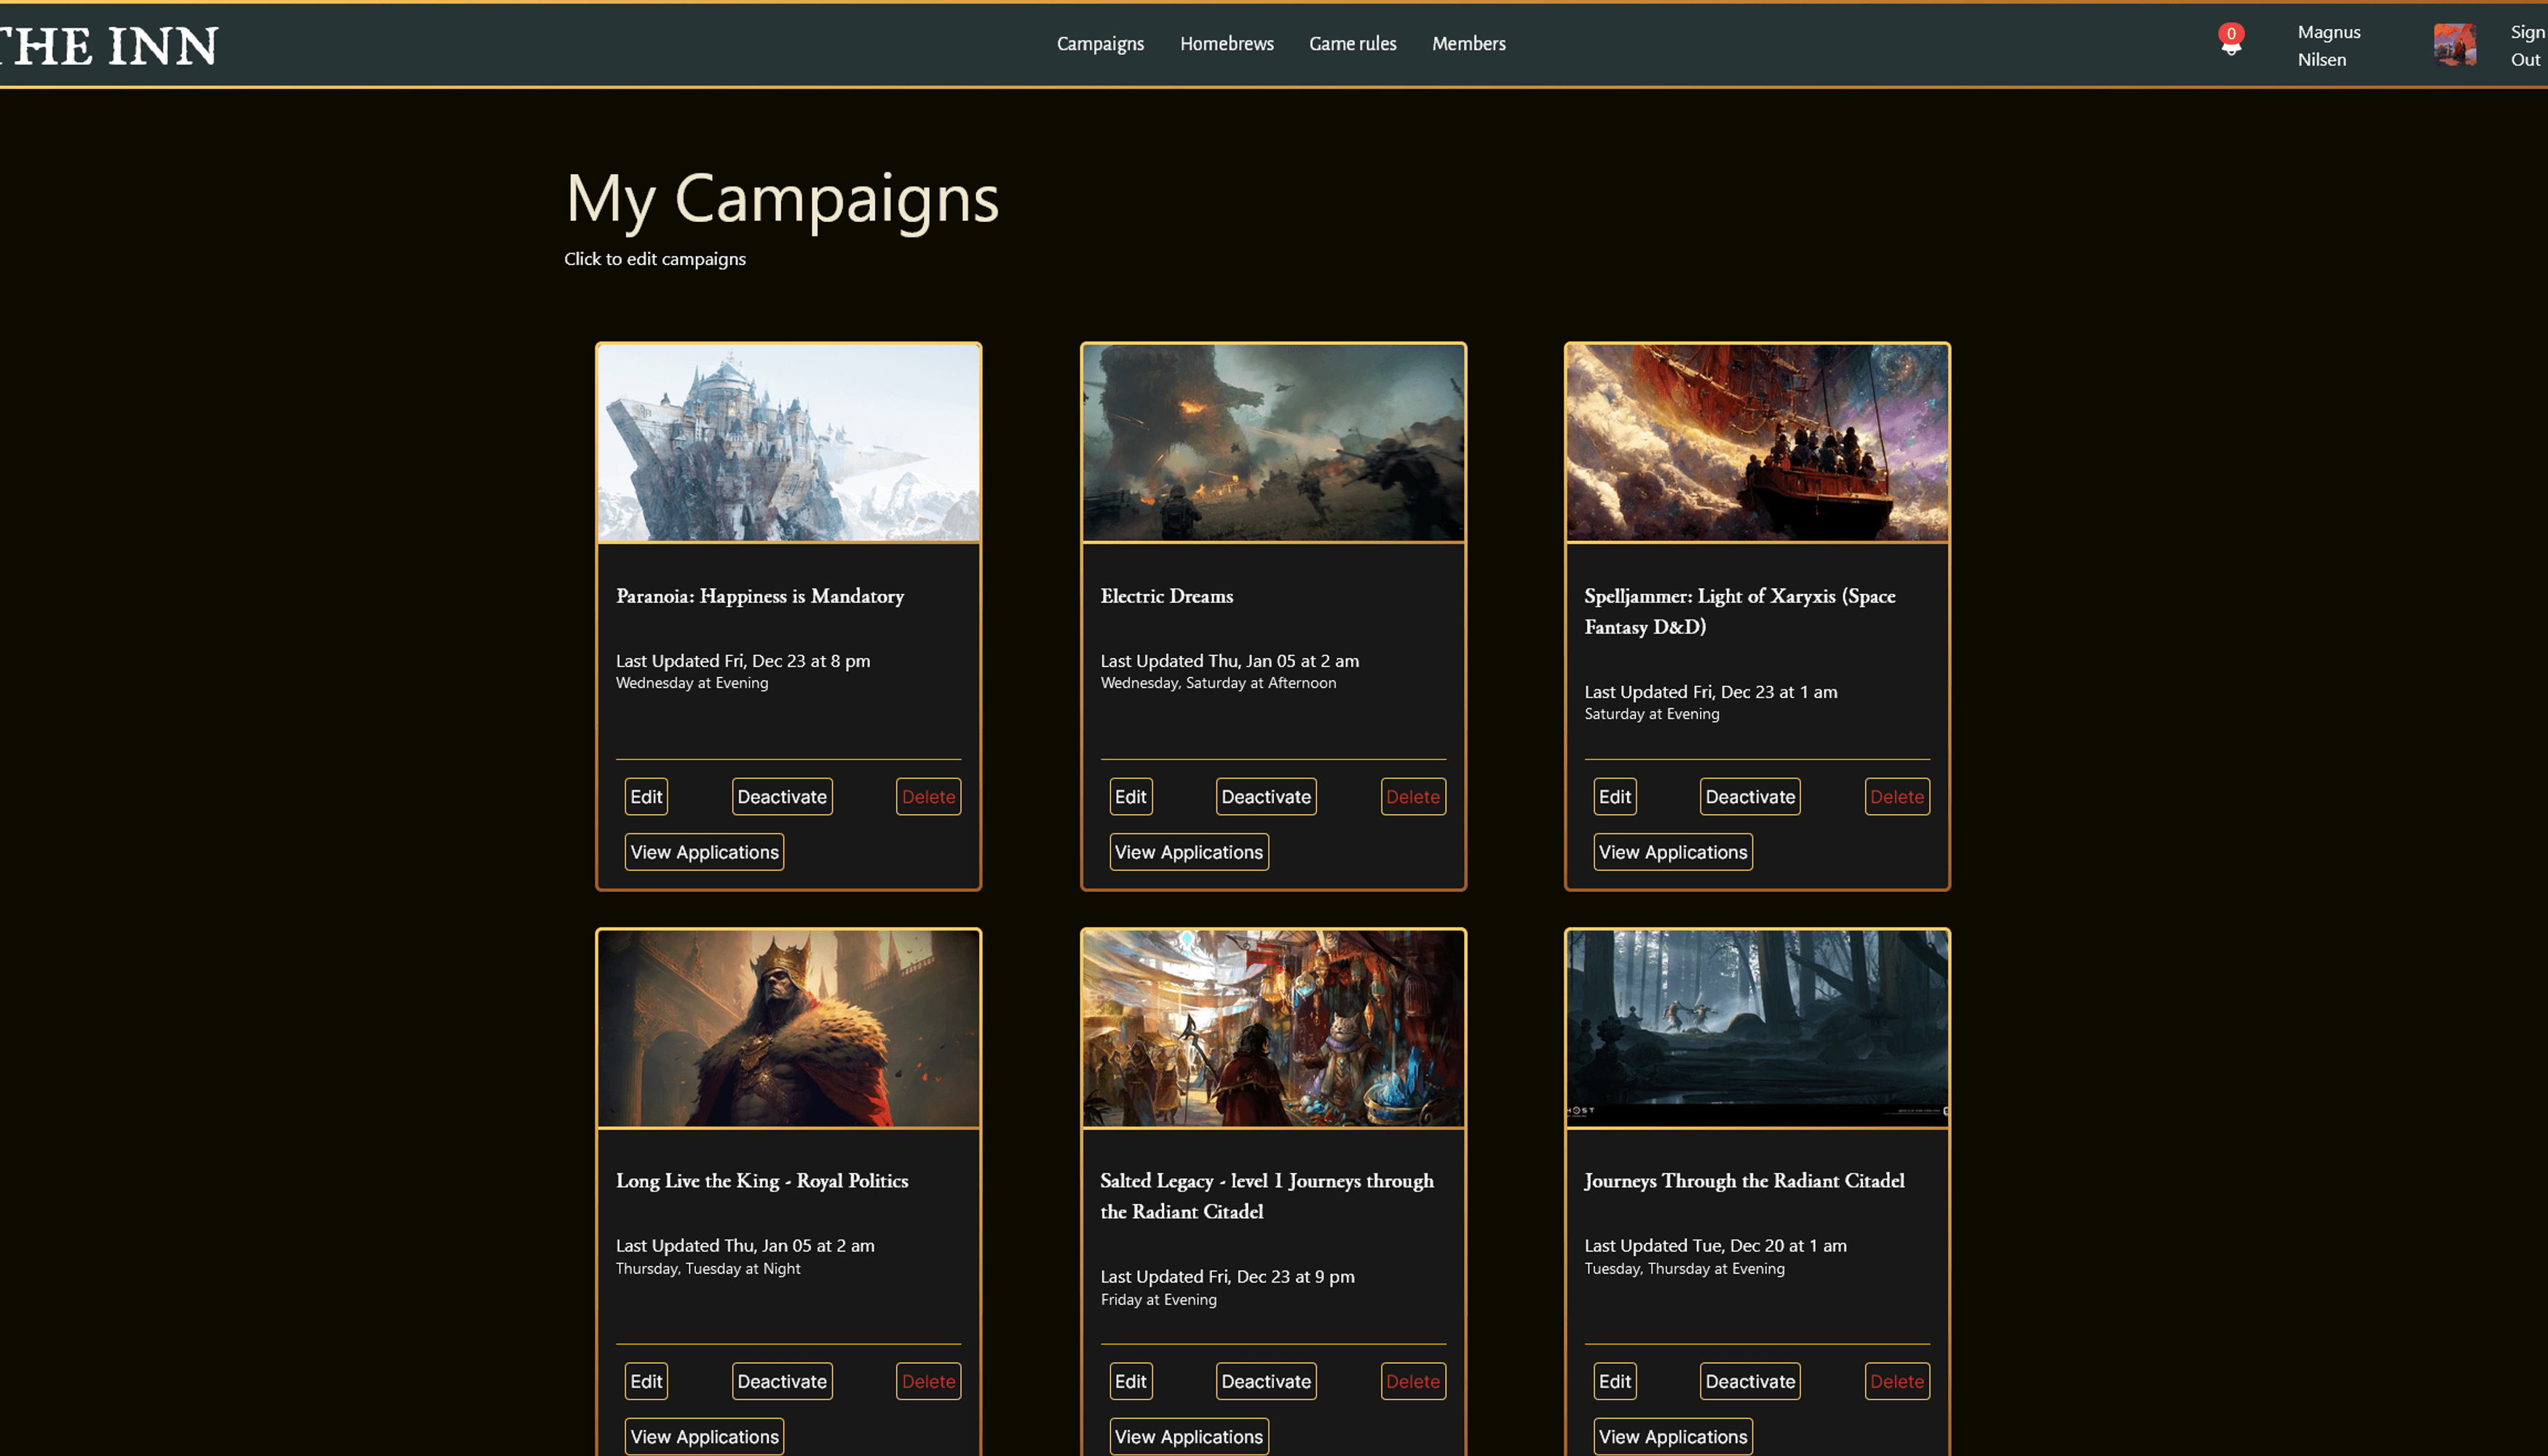 My Campaign Overviews Page